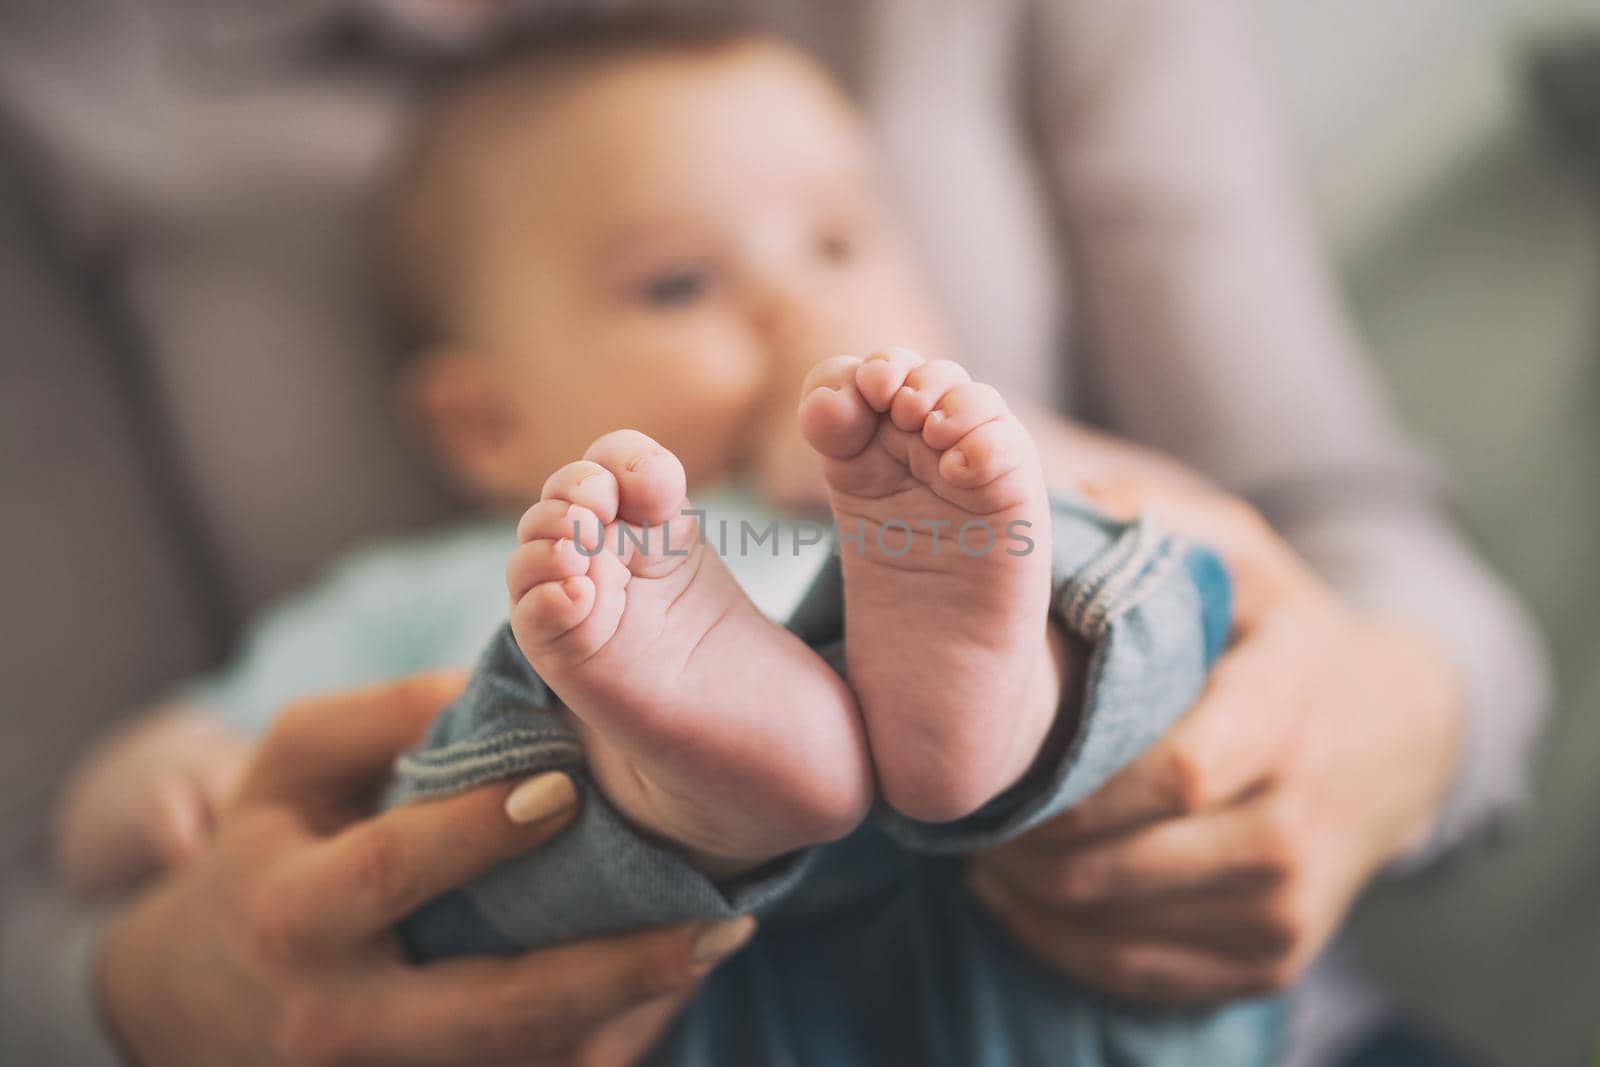 Close up image of baby feet. Mother is holding feet of her baby boy.